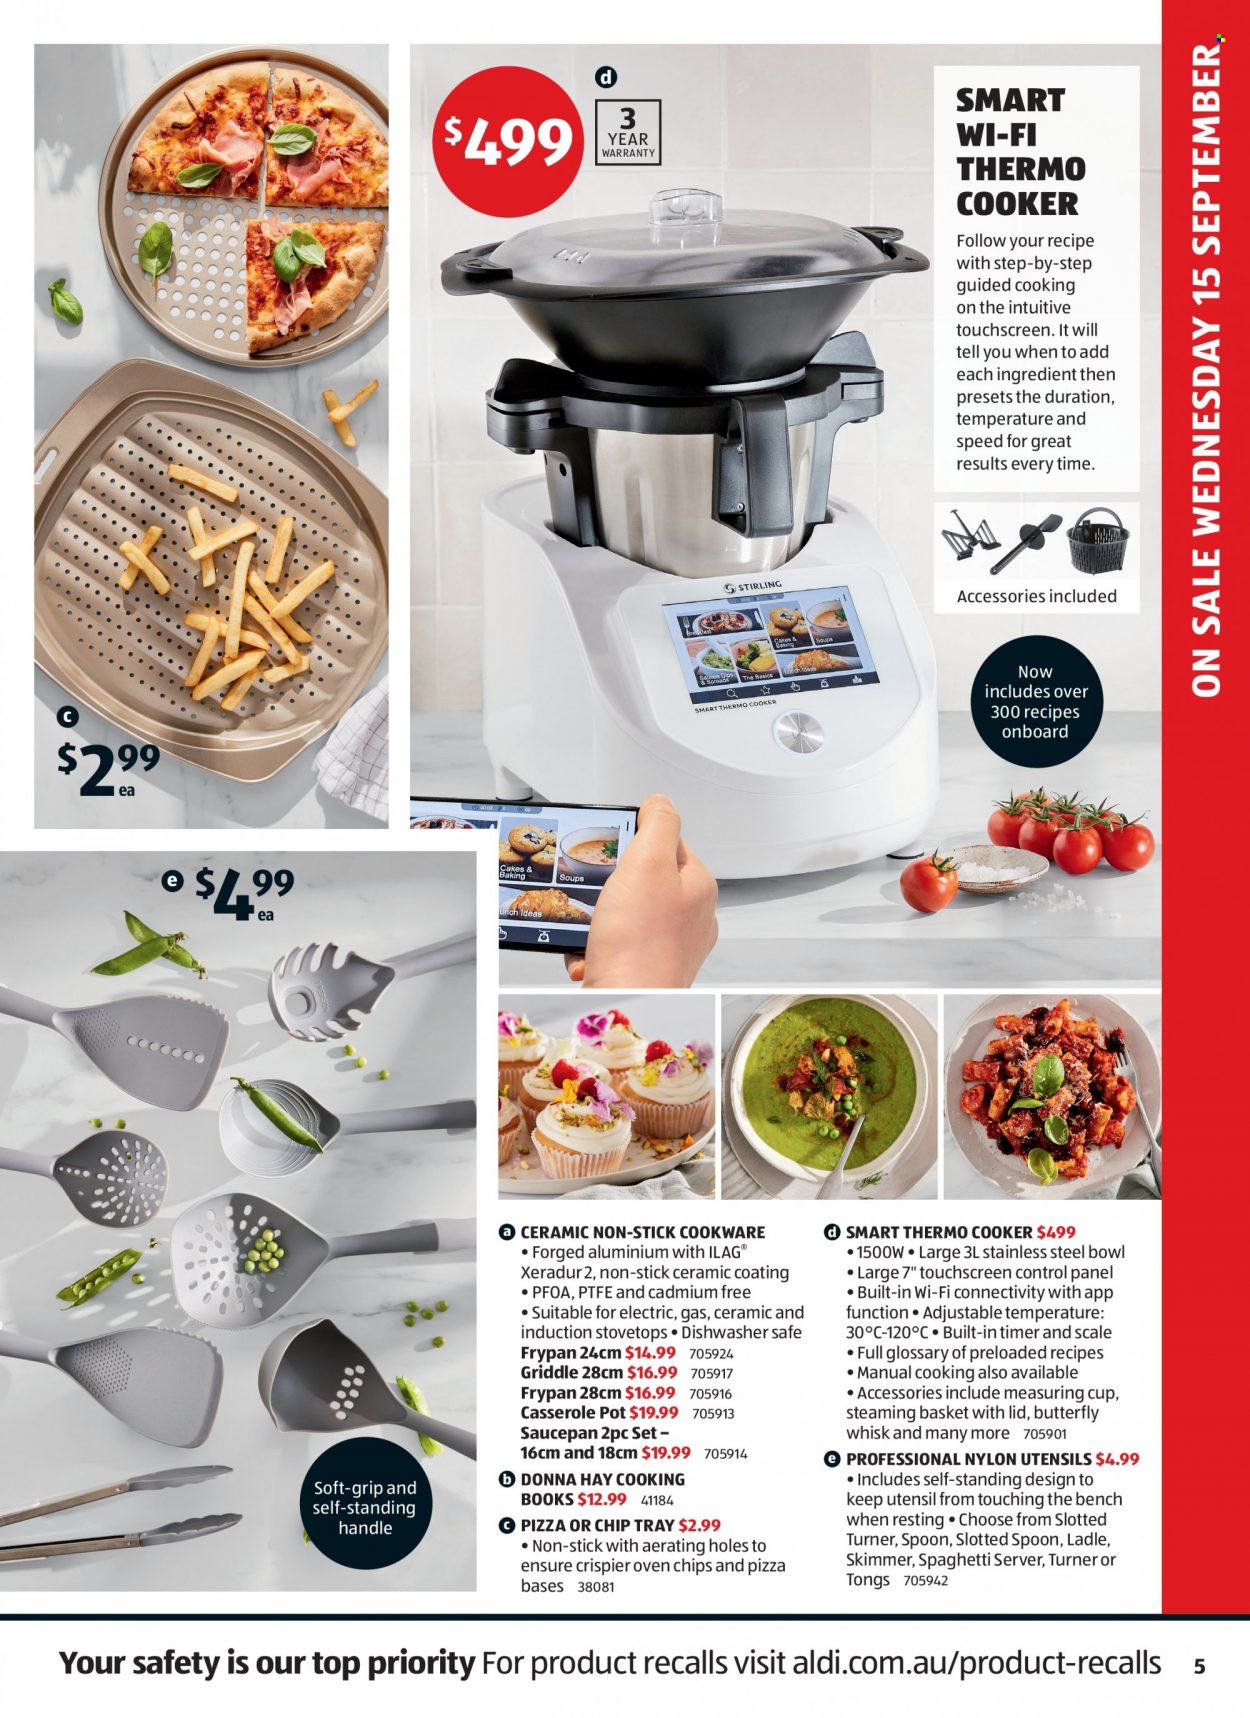 thumbnail - ALDI Catalogue - 15 Sep 2021 - 21 Sep 2021 - Sales products - scale, spaghetti, pizza dough, frozen chips, basket, cookware set, spoon, utensils, pot, casserole, saucepan, bowl, measuring cup, frying pan, book, bench, tong. Page 5.